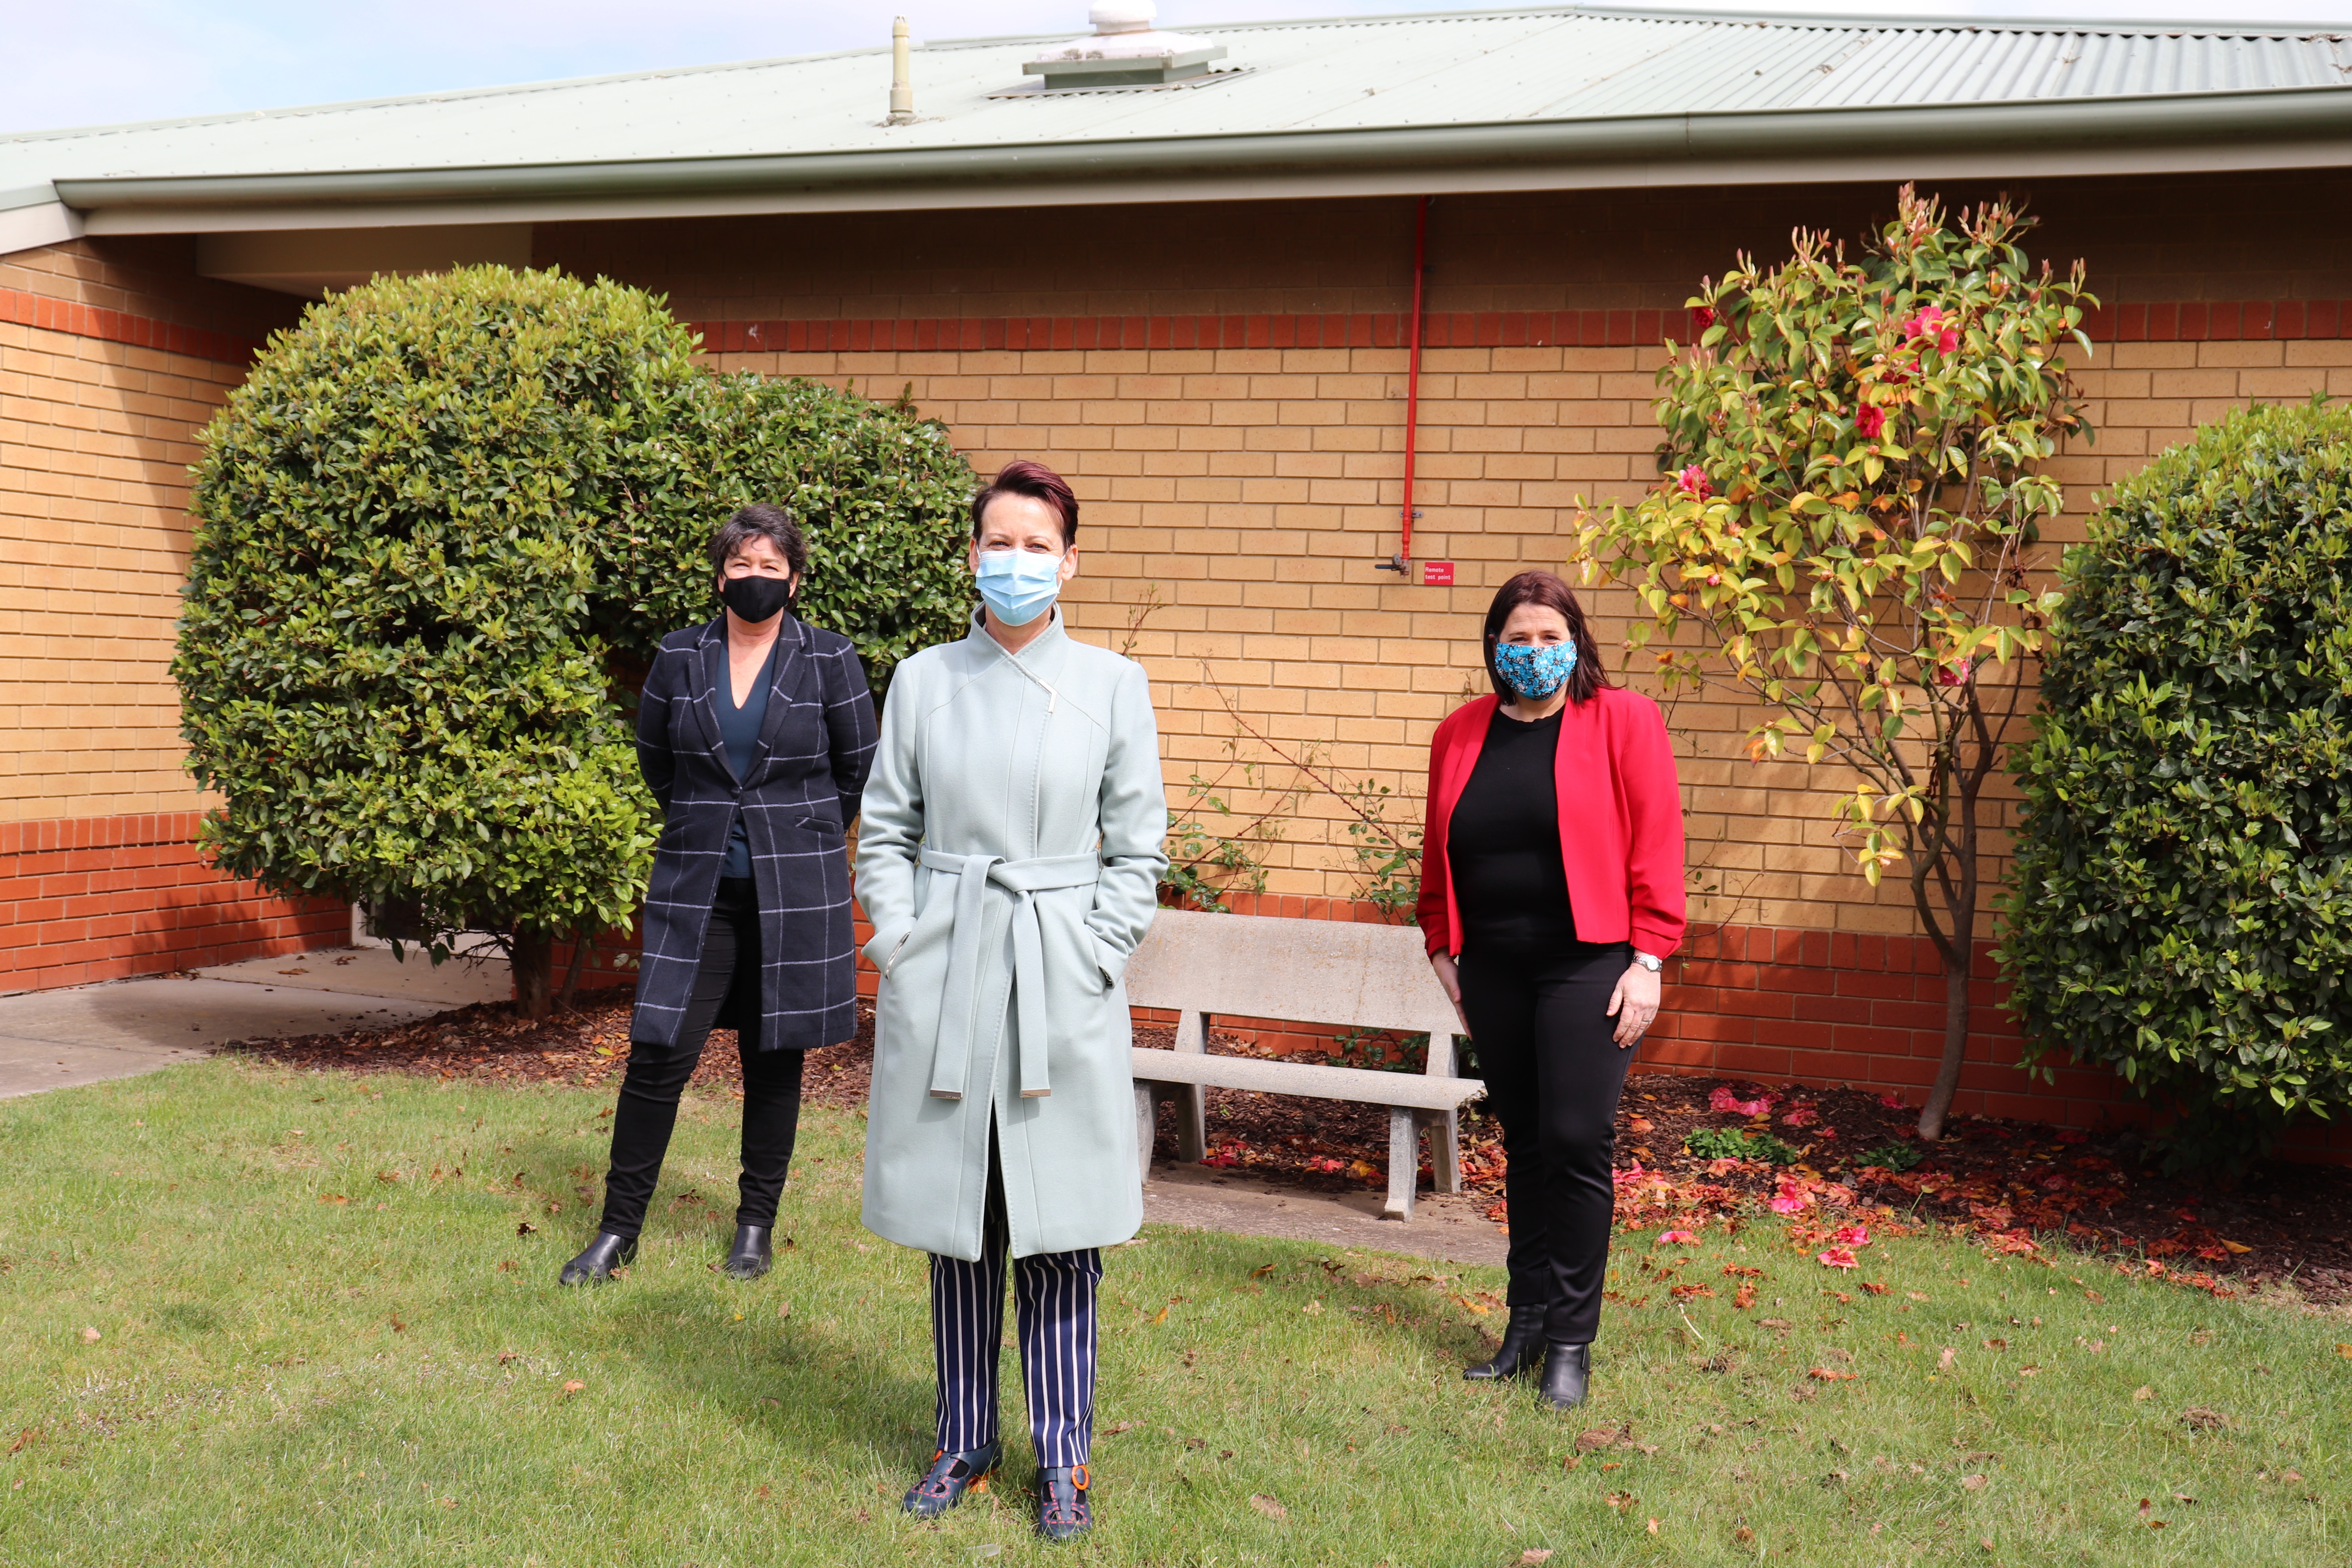 Executive Director of Aged Operations Jodie Cranham with Juliana Addison MP and Michaela Settle MP at Talbot Place